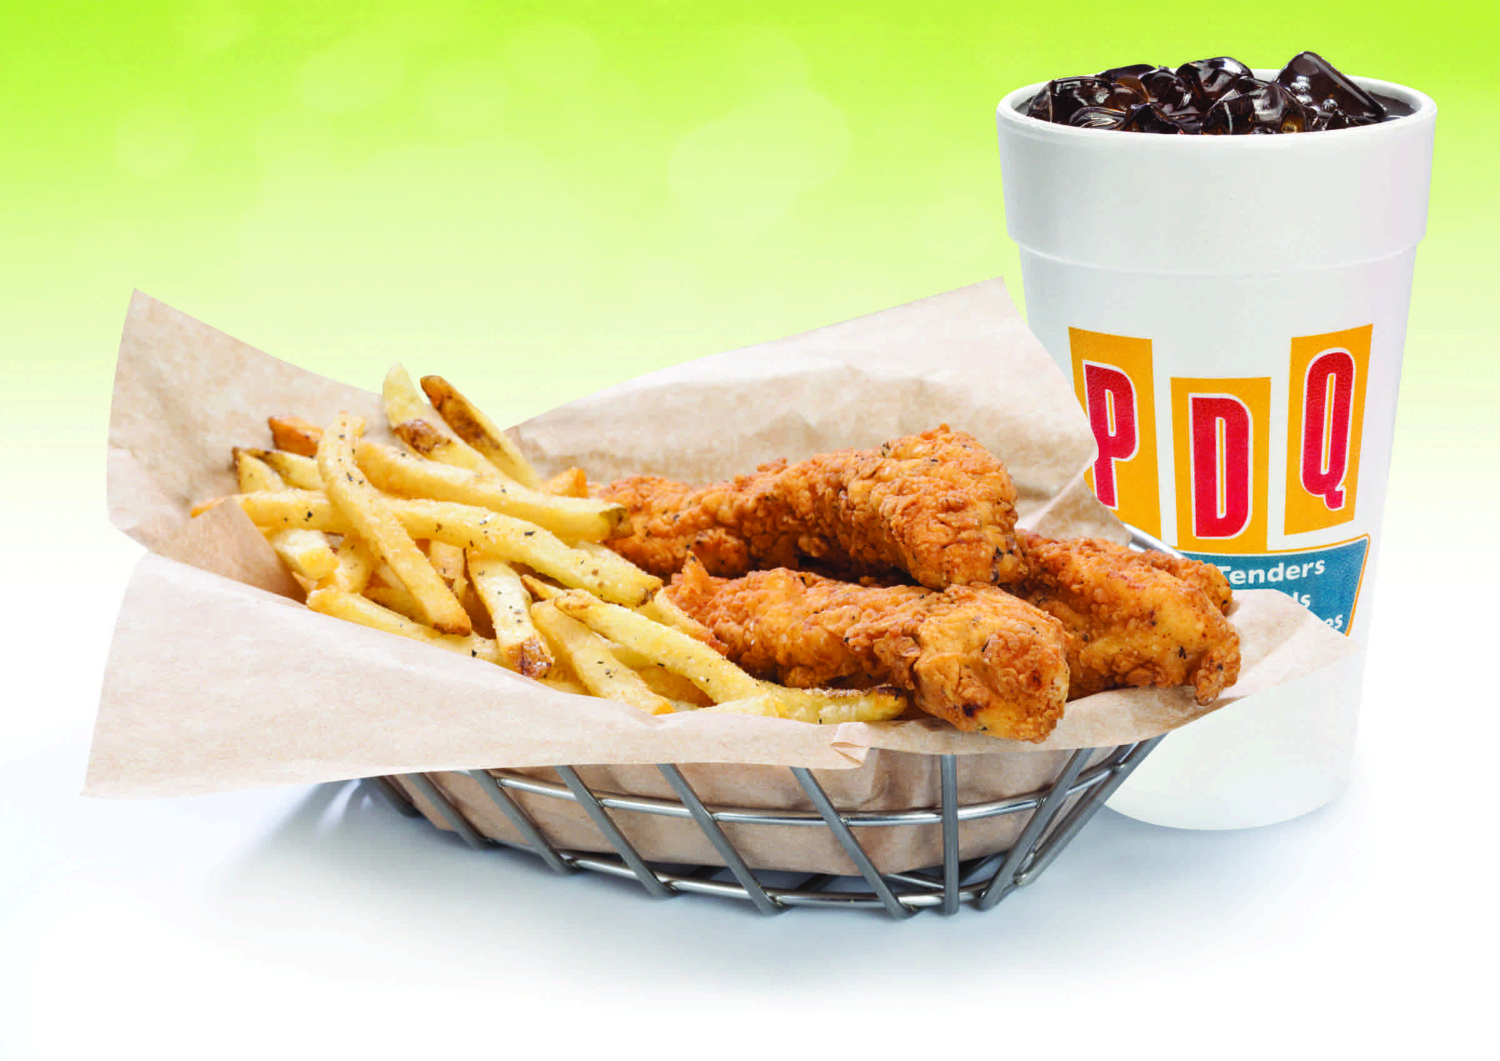 PDQ restaurants and National Breast Cancer Foundation are joining forces again in 2015 to help raise money as part of Breast Cancer Awareness Month.